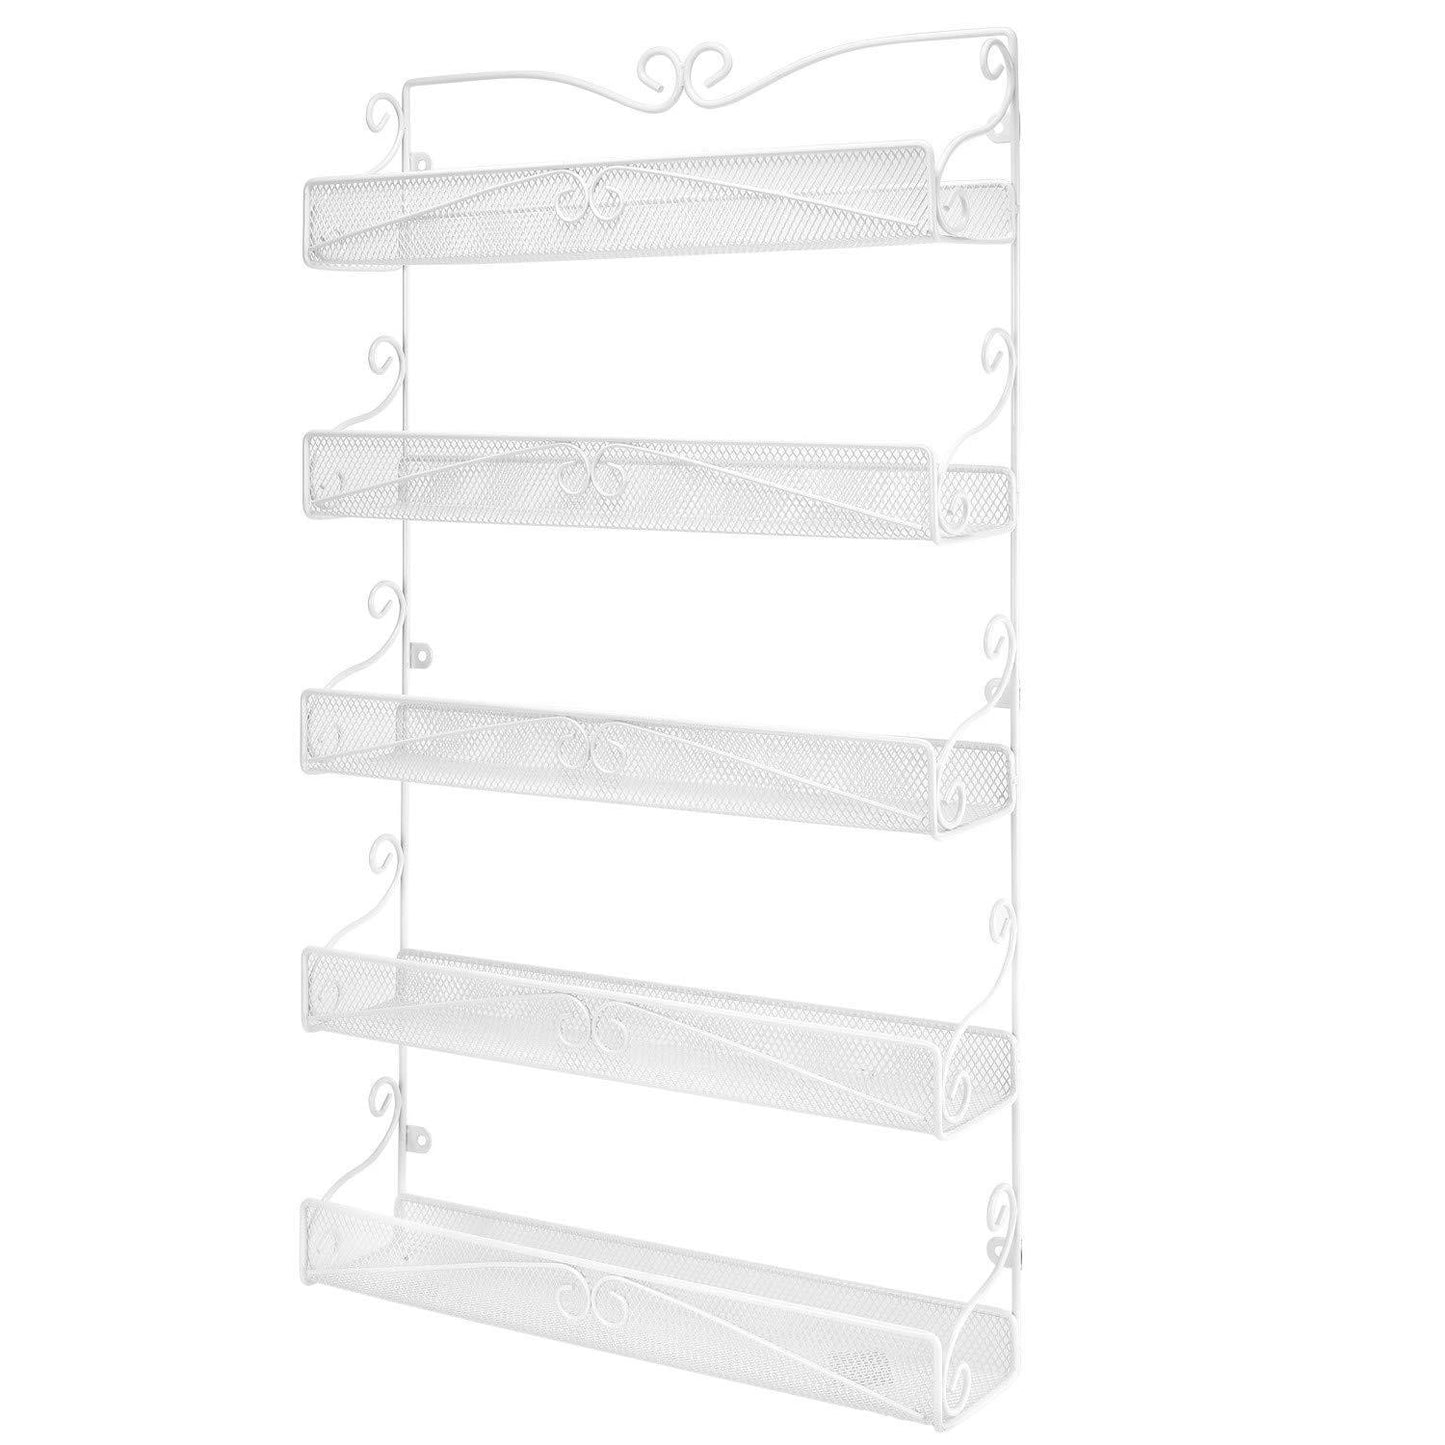 Products spice rack hanging wall mounted spice rack organizer shelf for pantry kitchen cabinet door 5 tier white